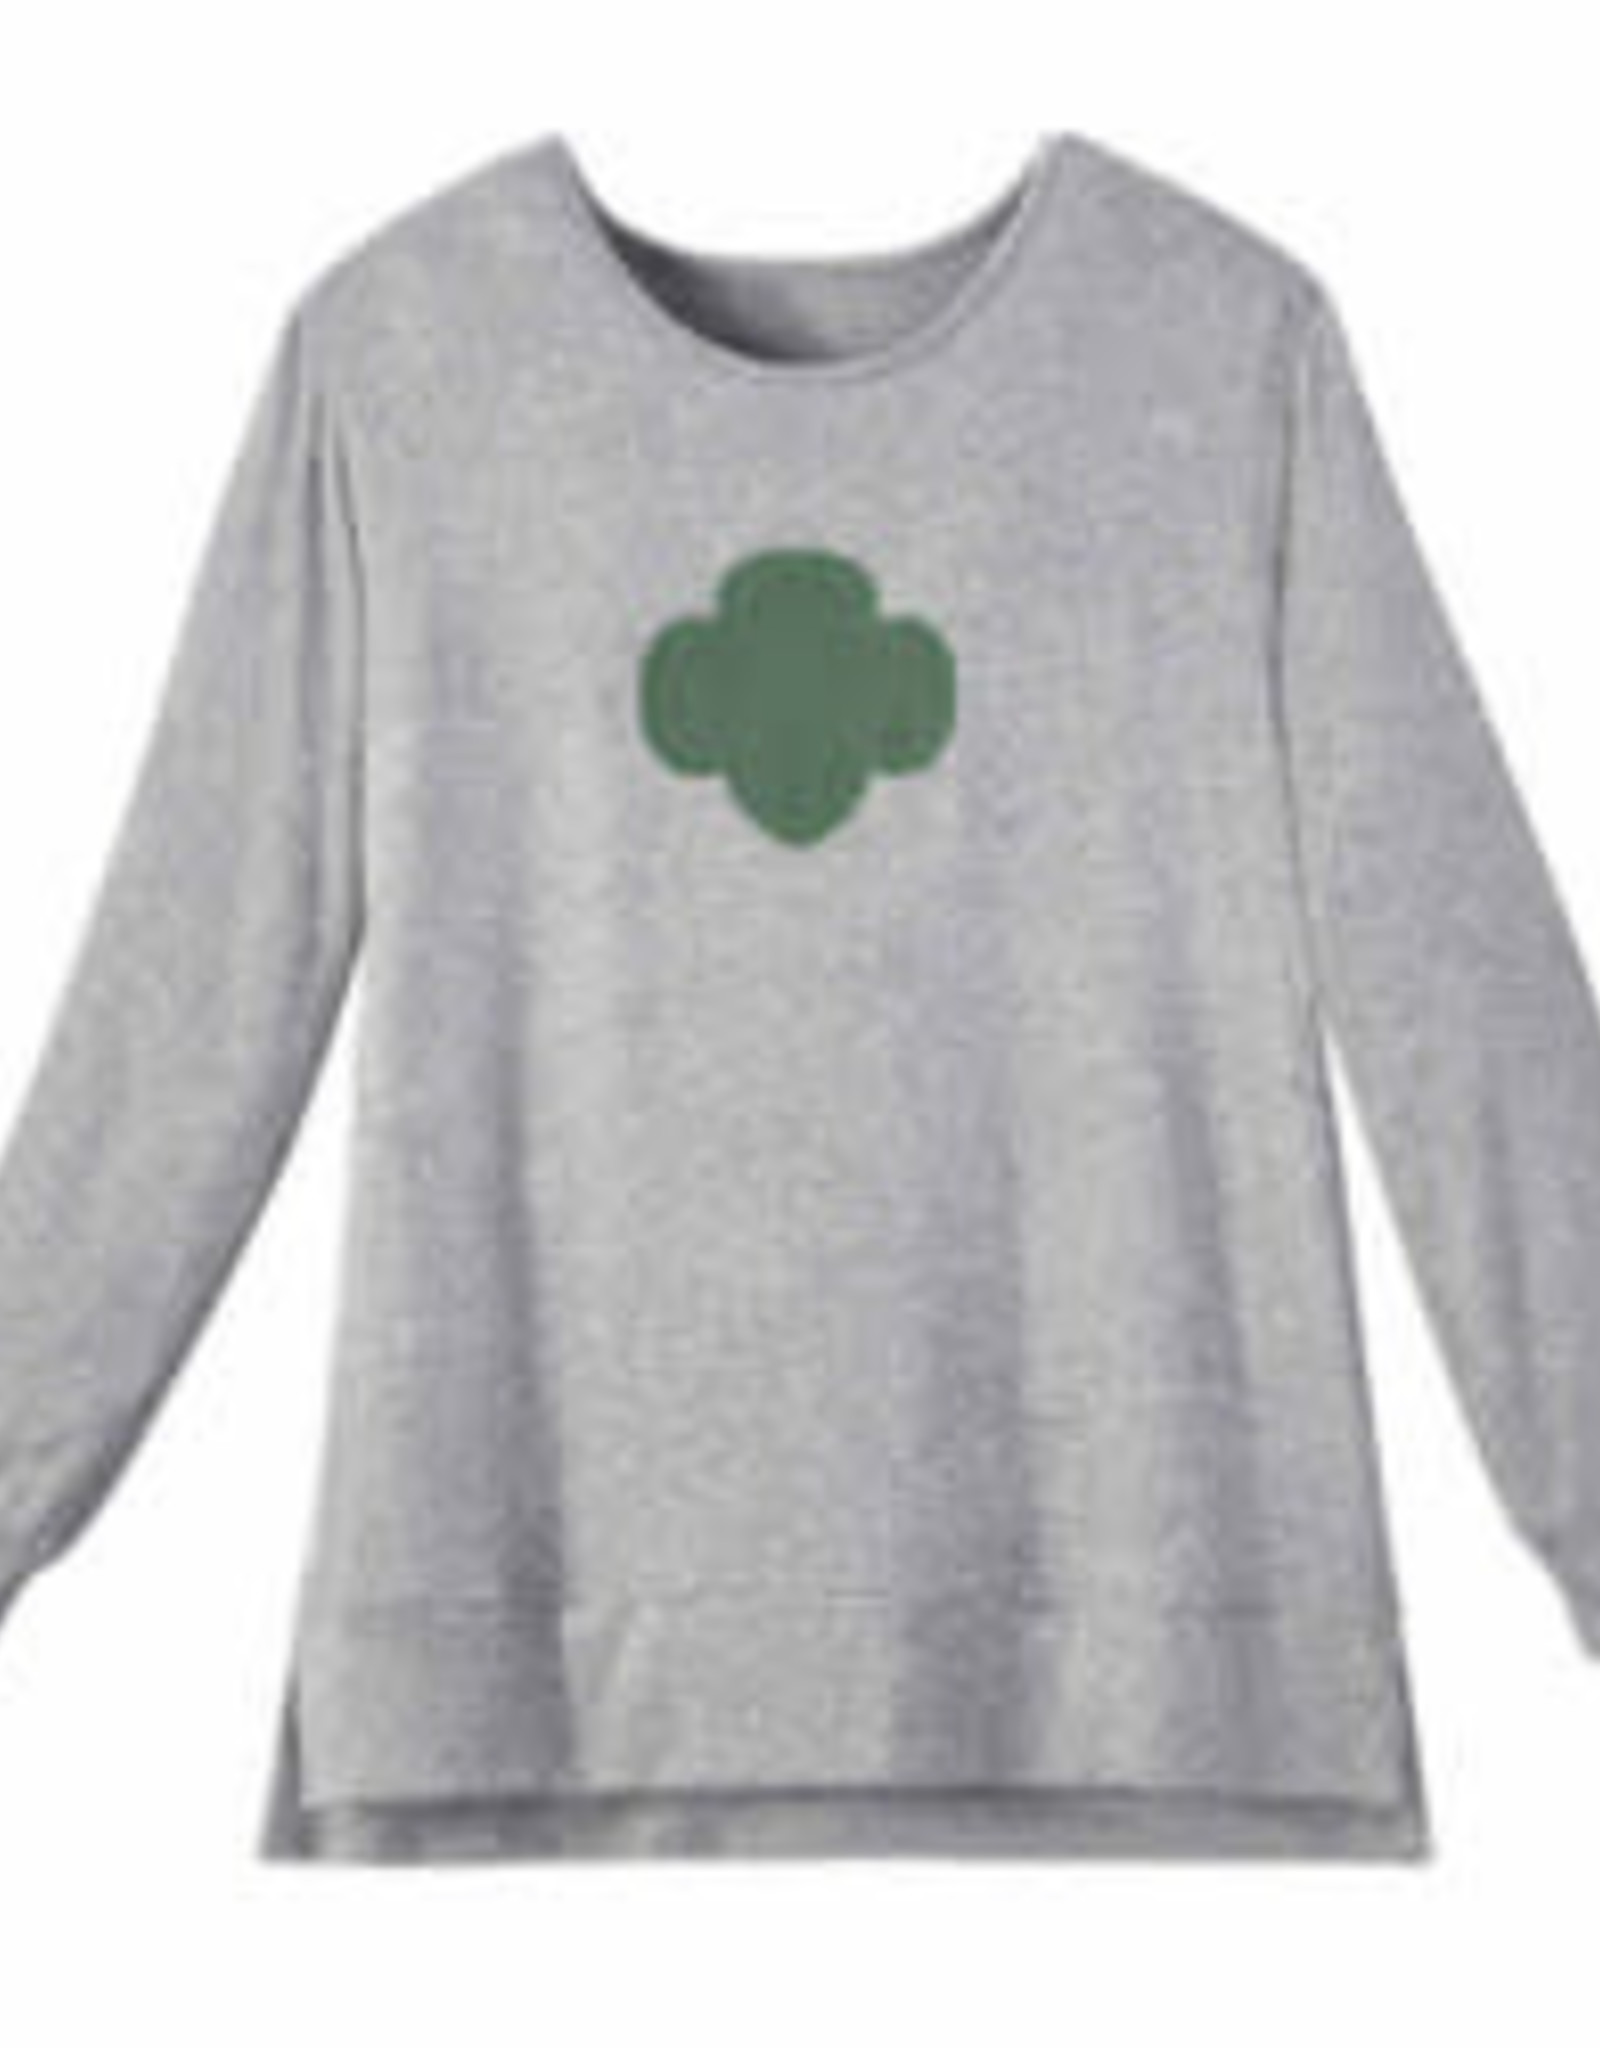 GIRL SCOUTS OF THE USA Lightweight Sweater Tunic — Women’s